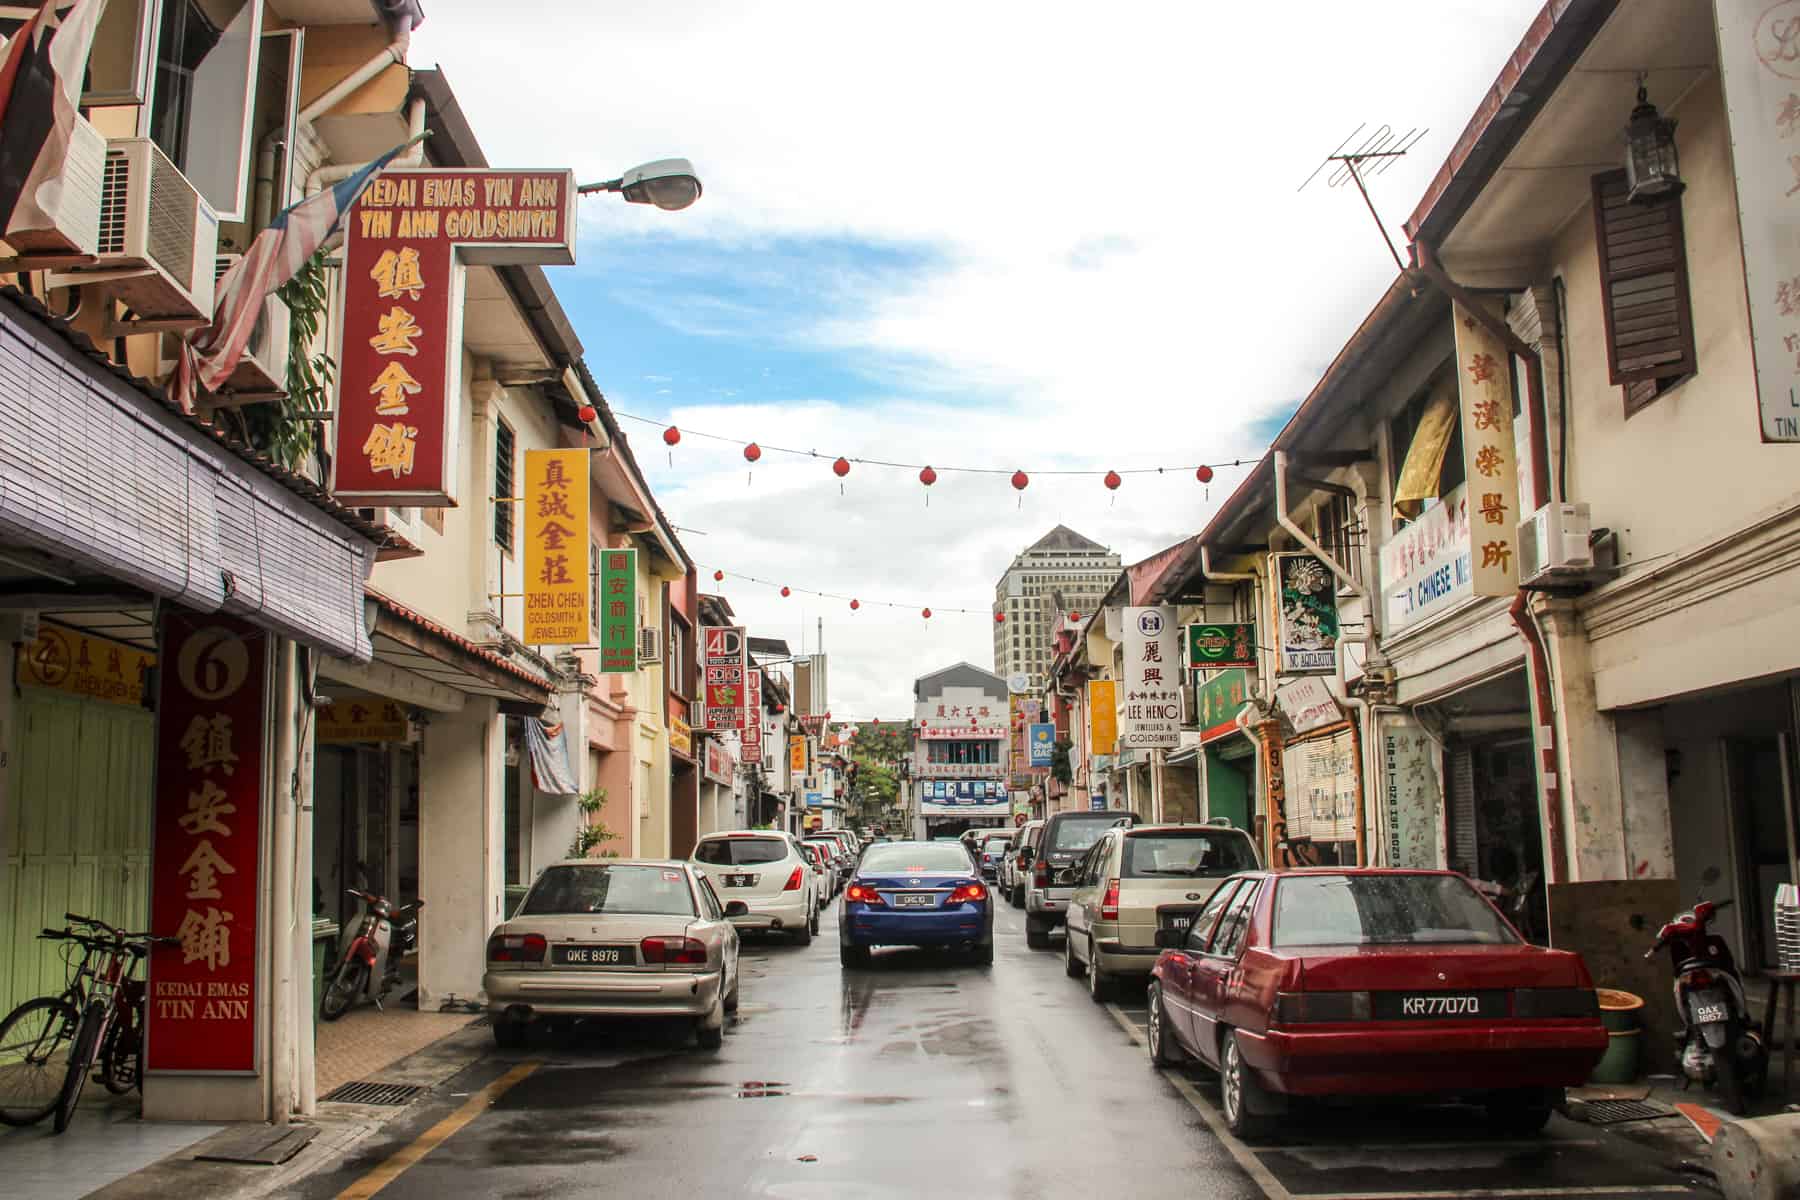 Chinese shop signs protrude from the beige buildings lining a typical shopping street in Old Town Kuching